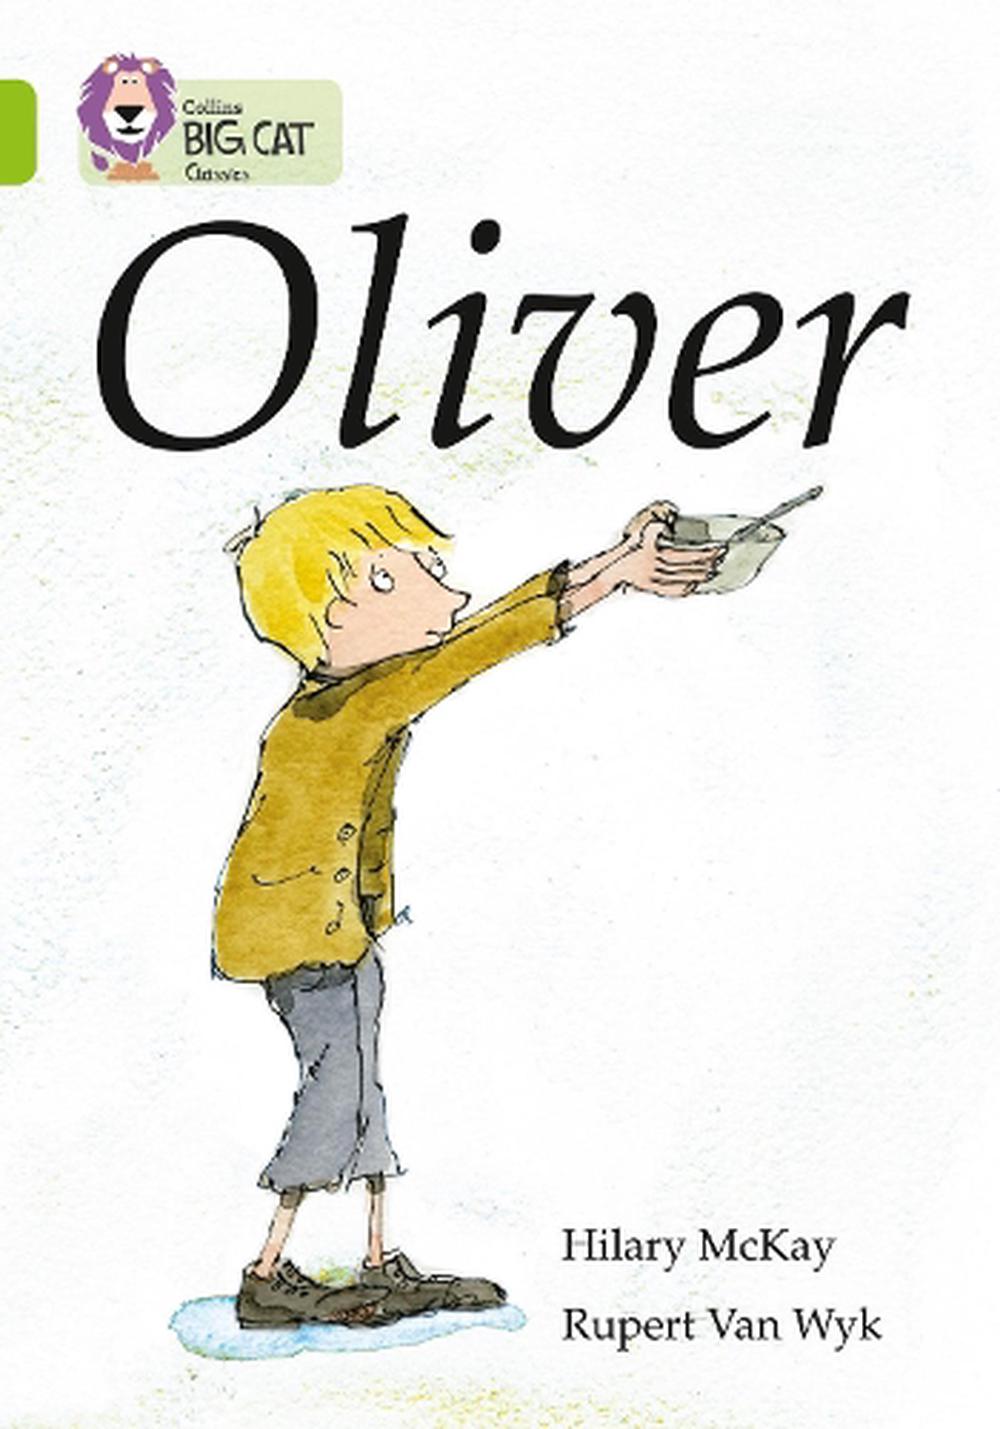 online　Oliver　Paperback,　The　Hilary　by　McKay,　at　9780007462094　Buy　Nile